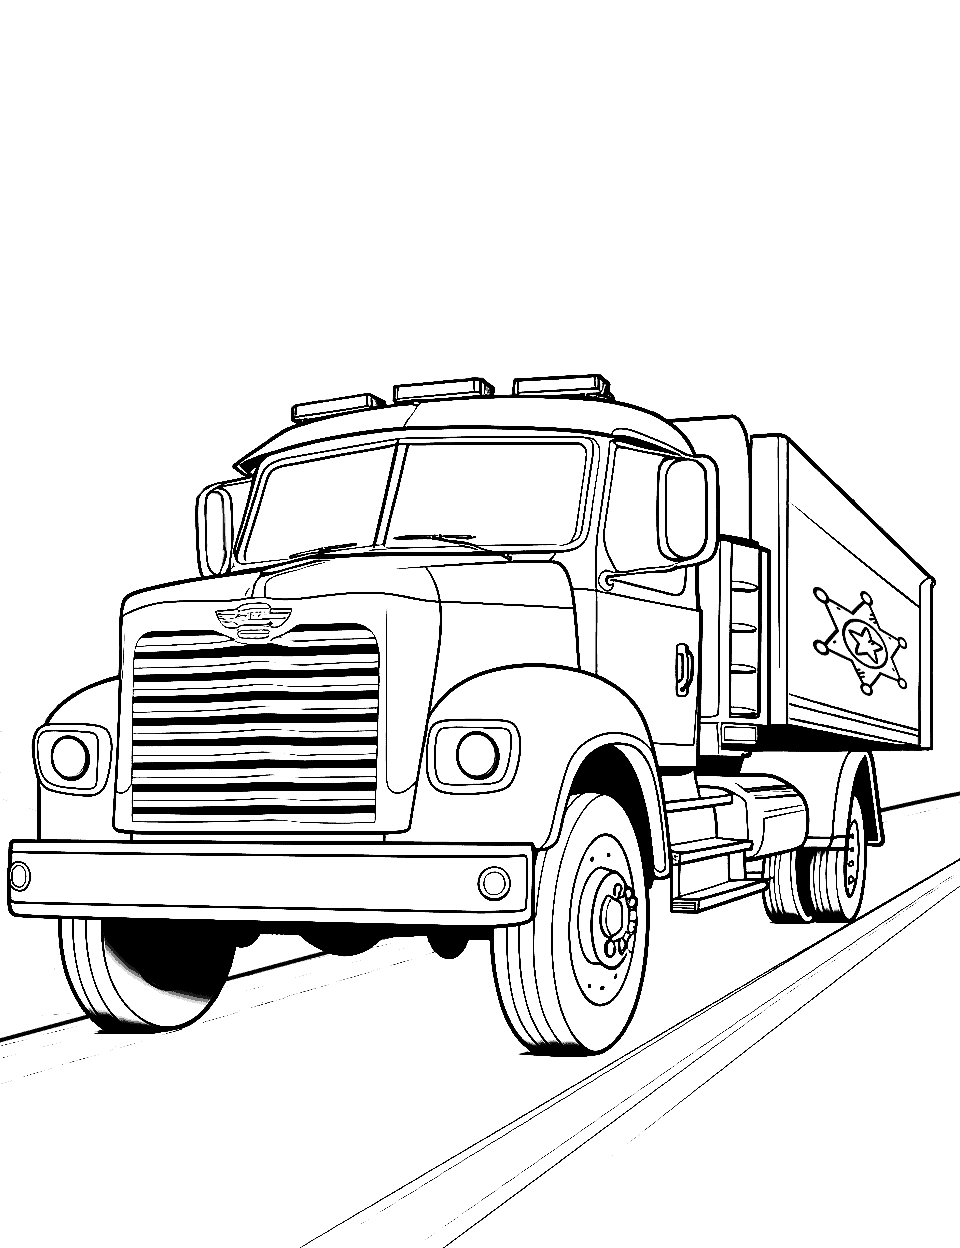 Police Chase Coloring Page - A police truck in a chase on a straight, clear road.